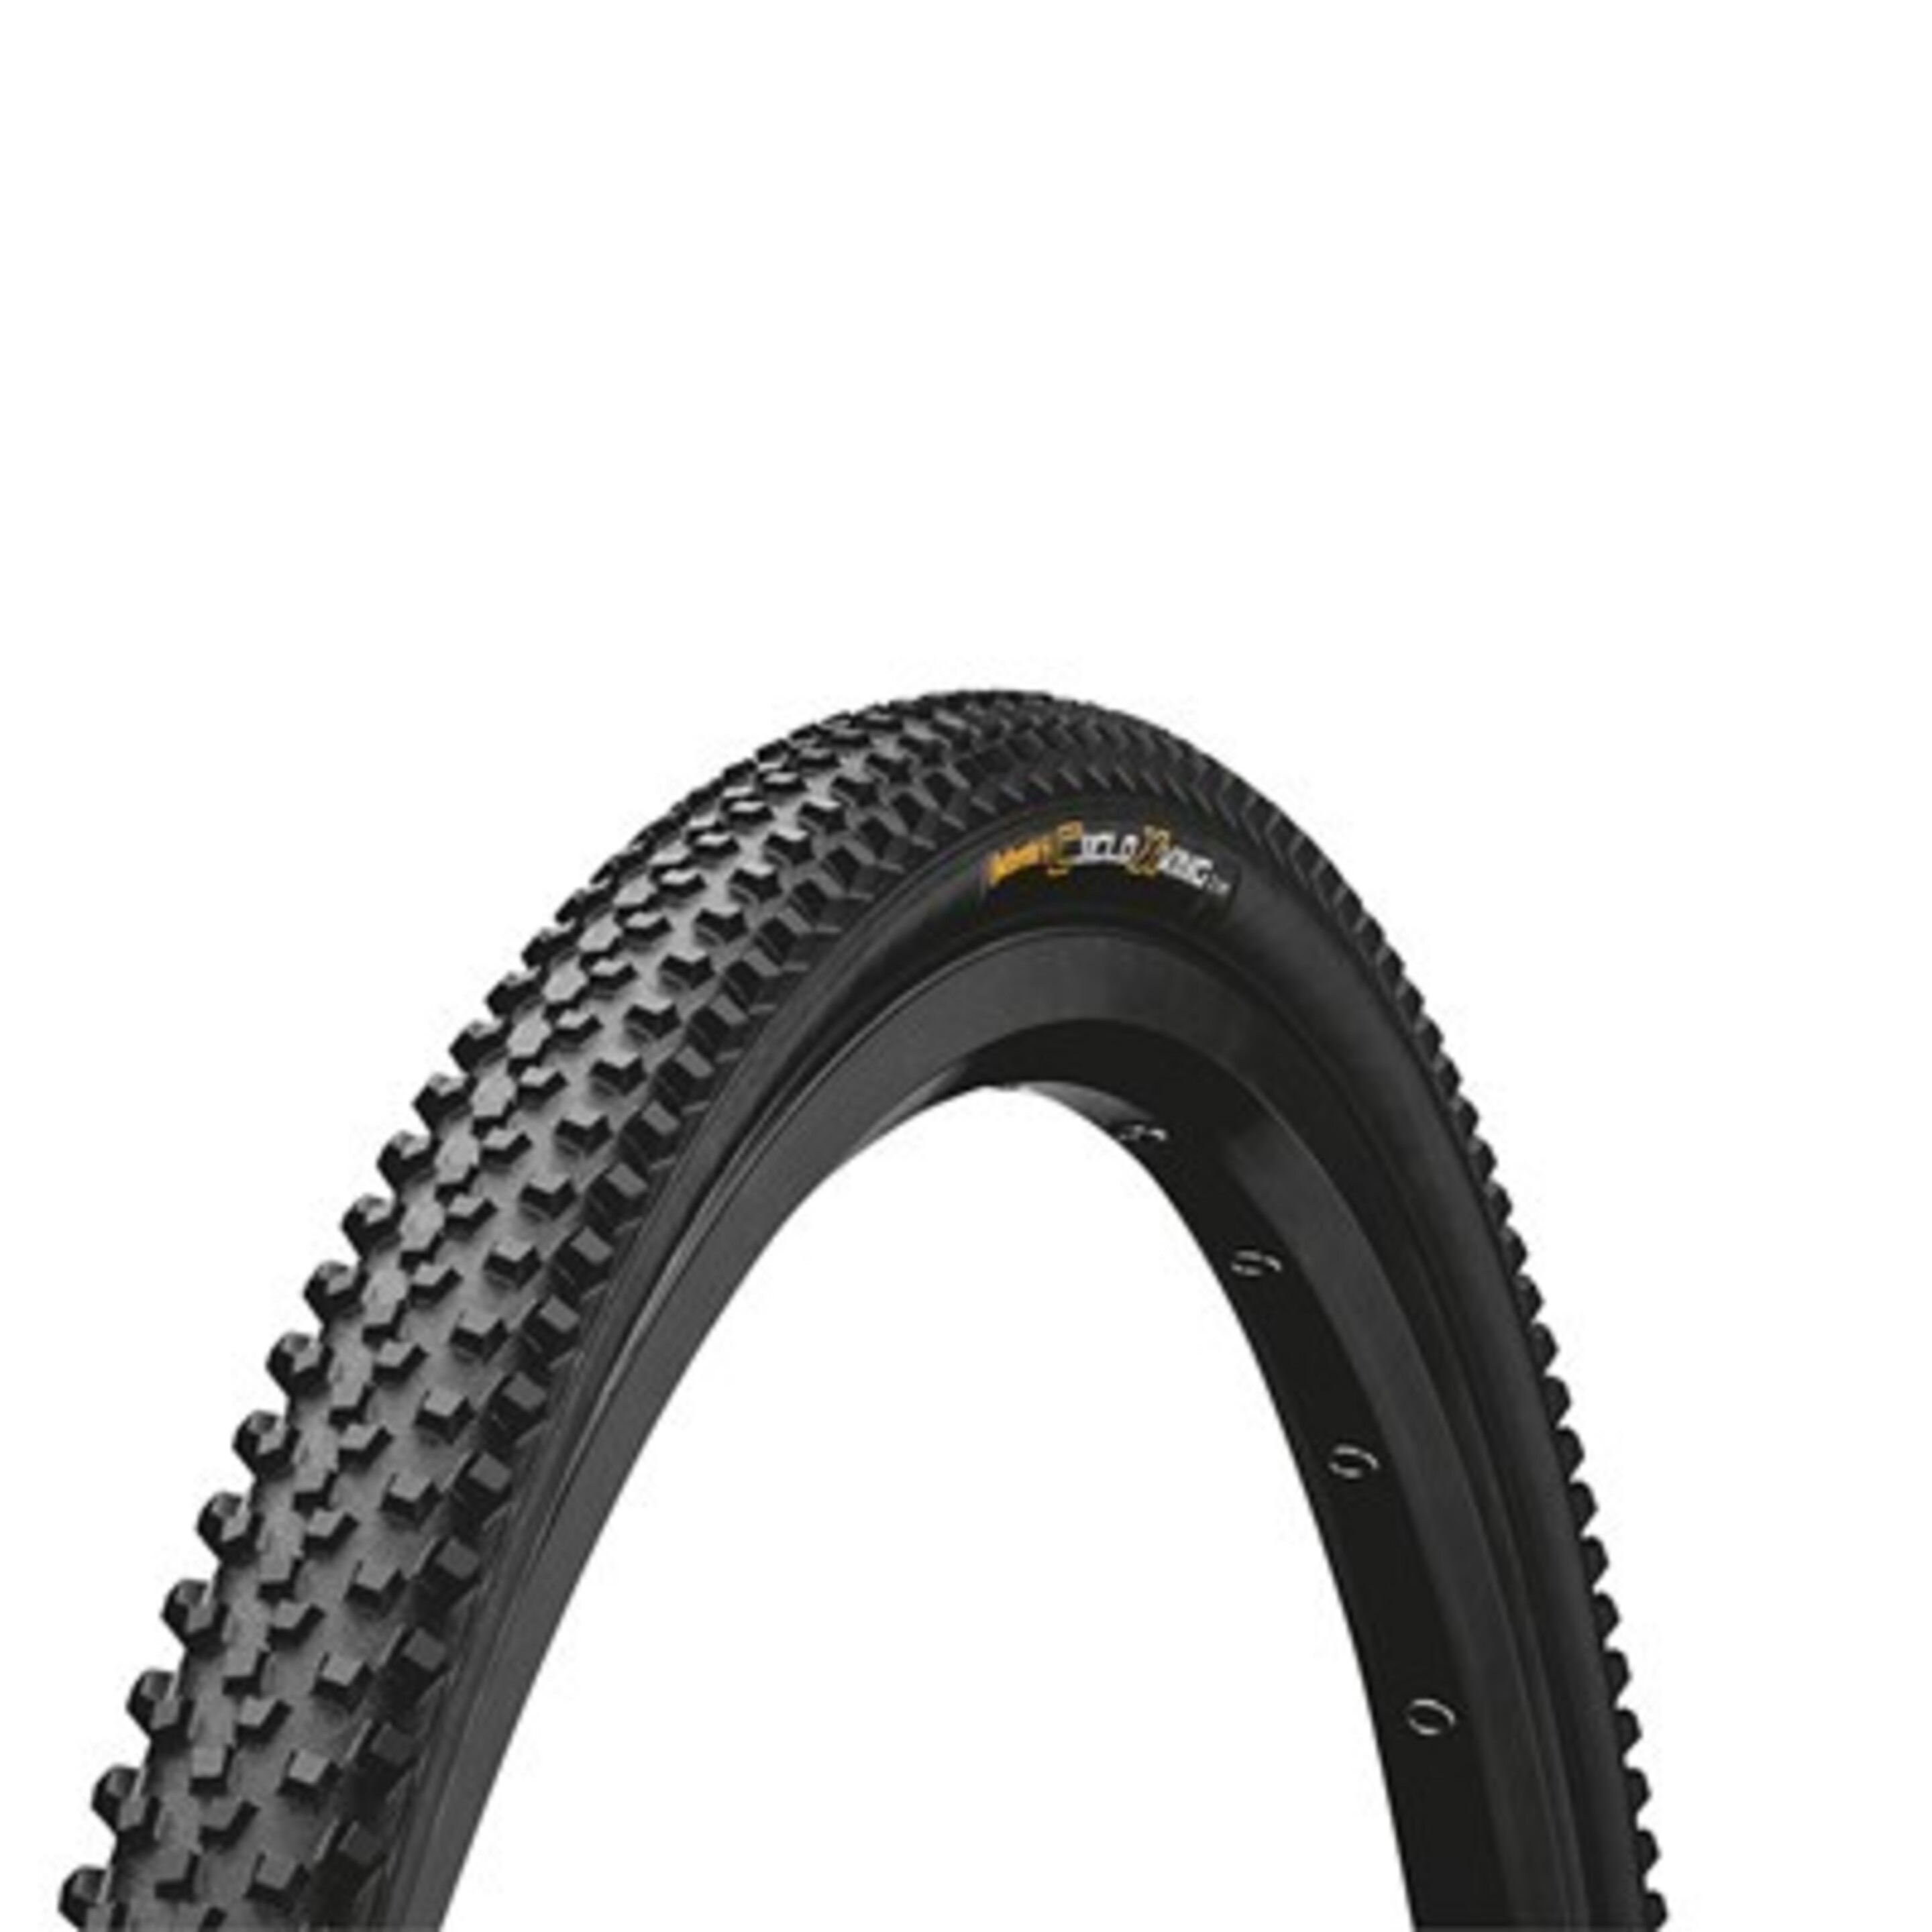 Cubierta Continental Ciclo Cross Xking Rs Cx 700x32c Pl - negro - 